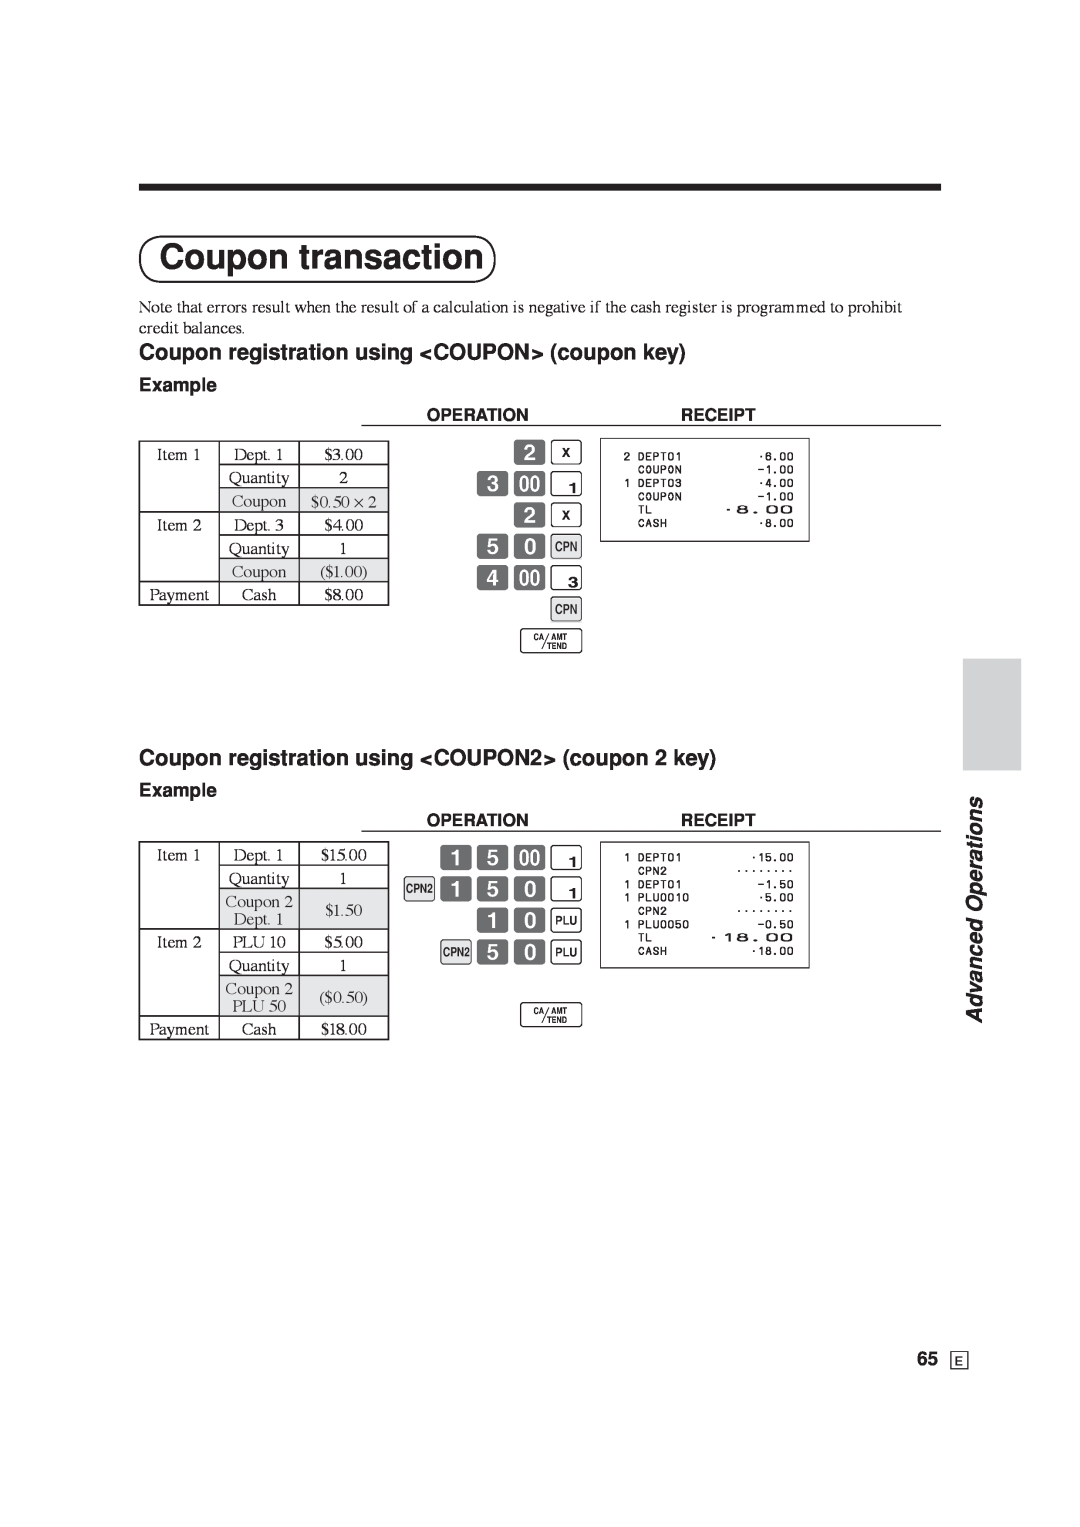 Casio SE-C6000 Coupon transaction, Coupon registration using COUPON coupon key, 65 E, Advanced Operations, Example 